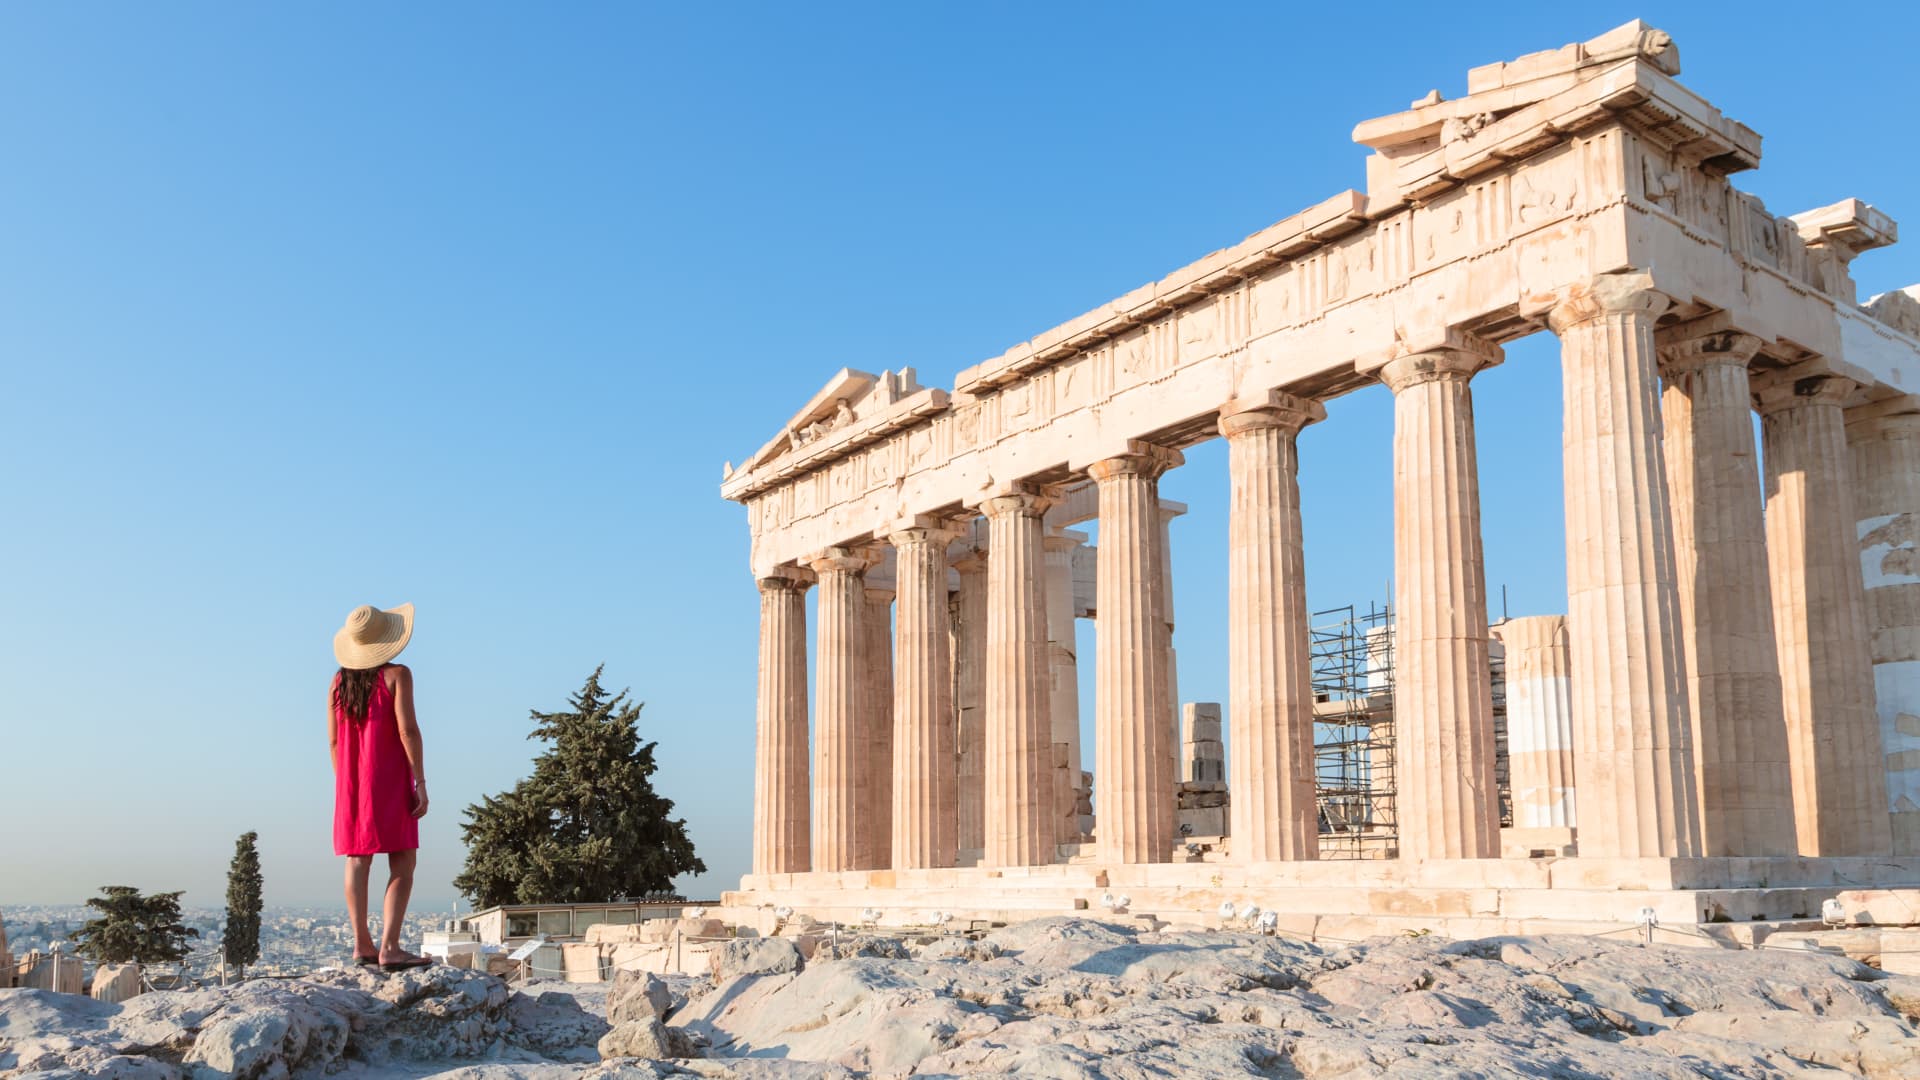 Though the Acropolis has reopened, Greece is currently under lockdown-type restrictions with a nighttime curfew and store and restaurant closures.